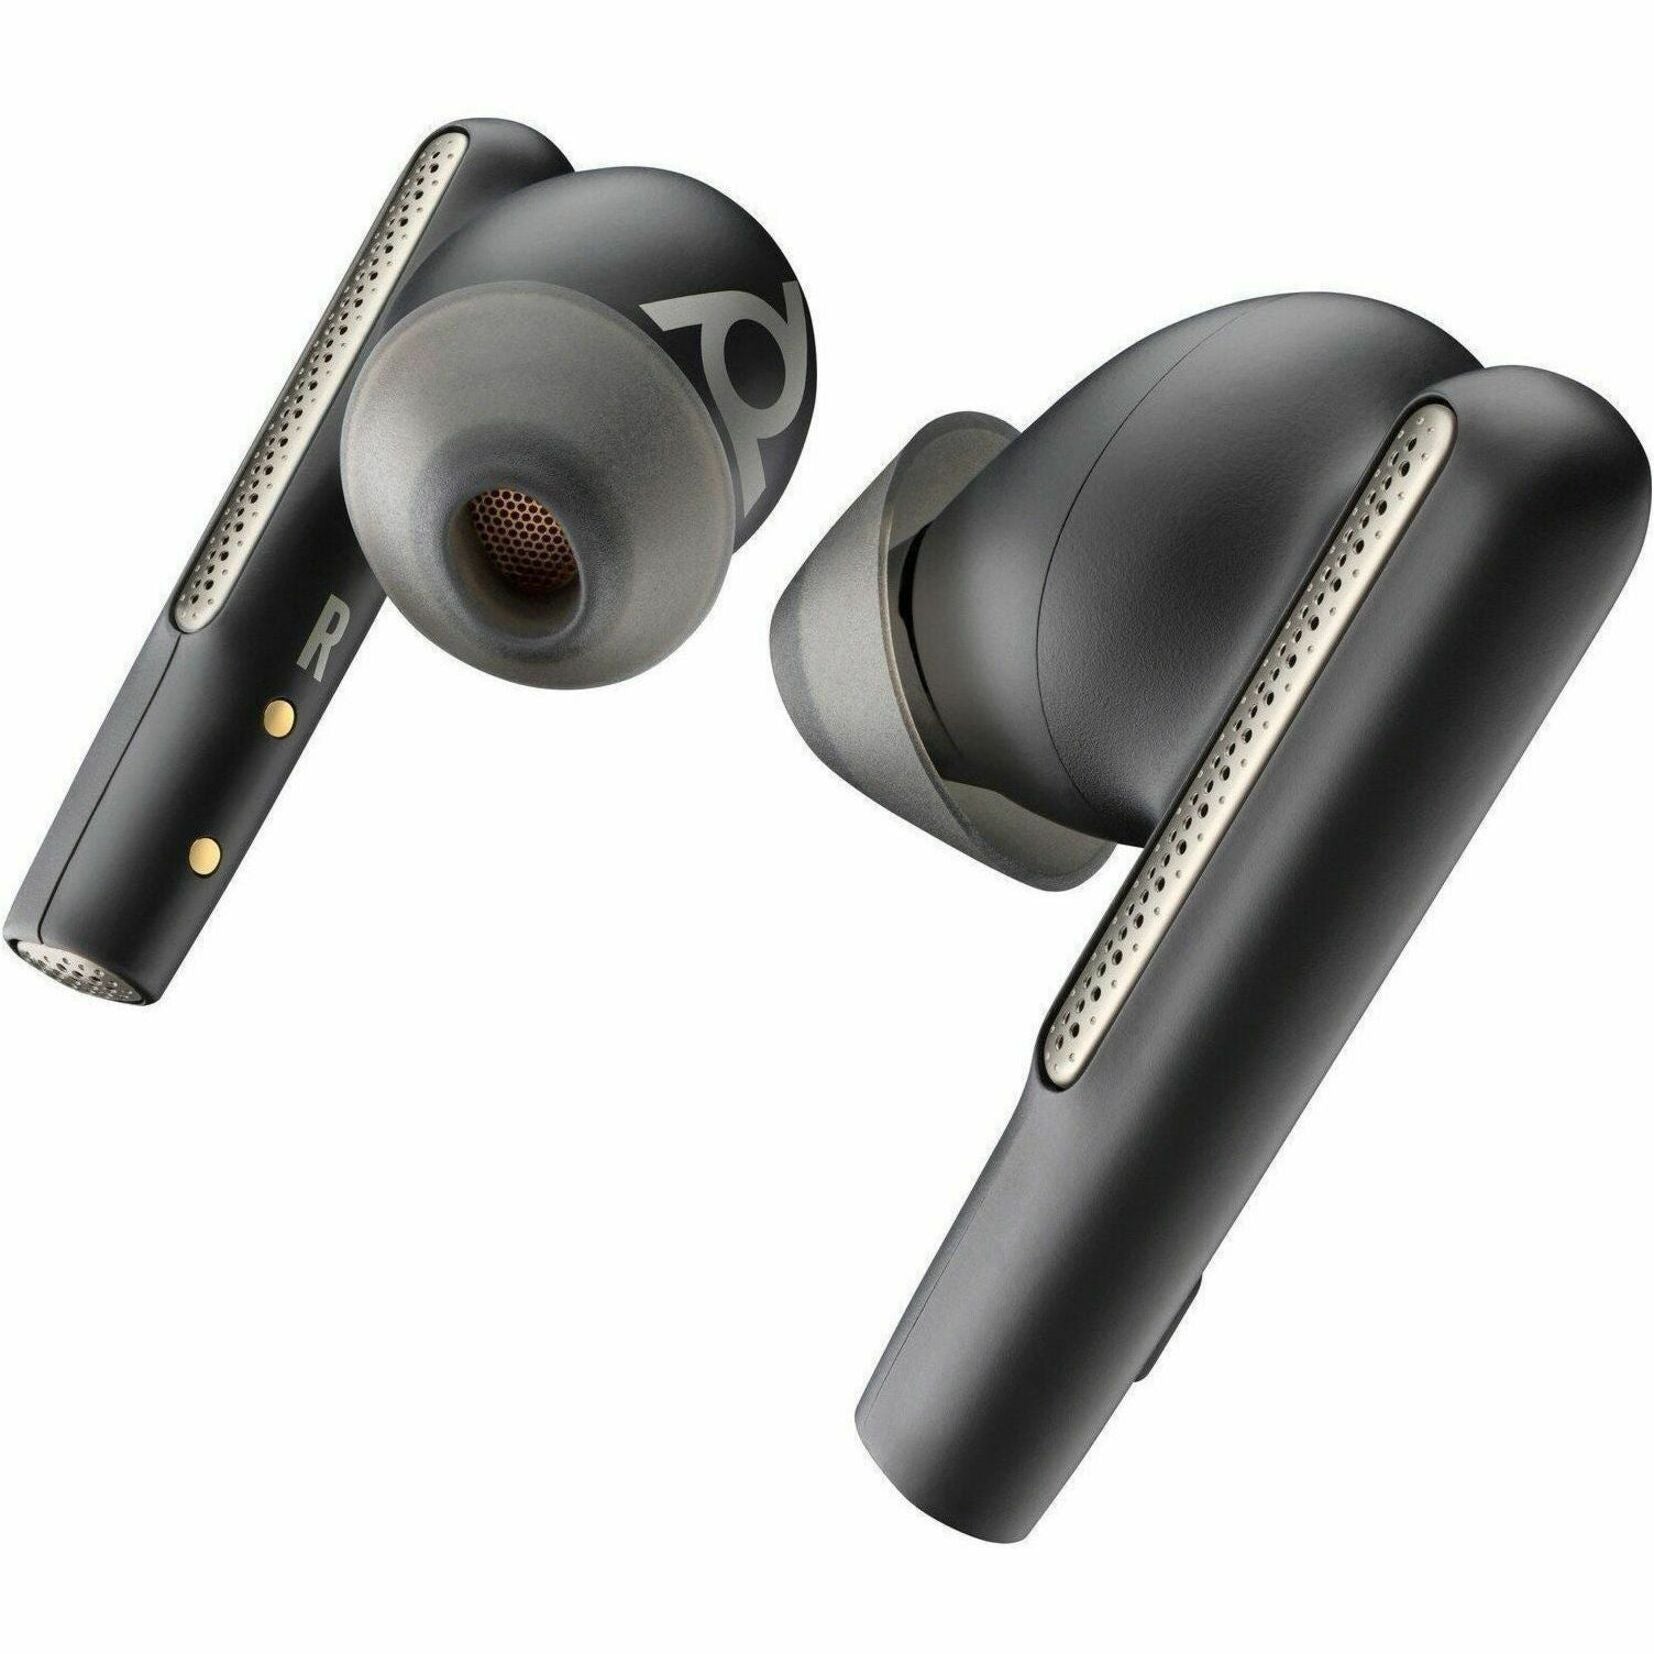 Poly 7Y8H3AA Voyager Free 60 UC Earset, Wireless Bluetooth Earbuds with Hybrid Active Noise Cancelling, Fast Charging, and Voice Assistant Support